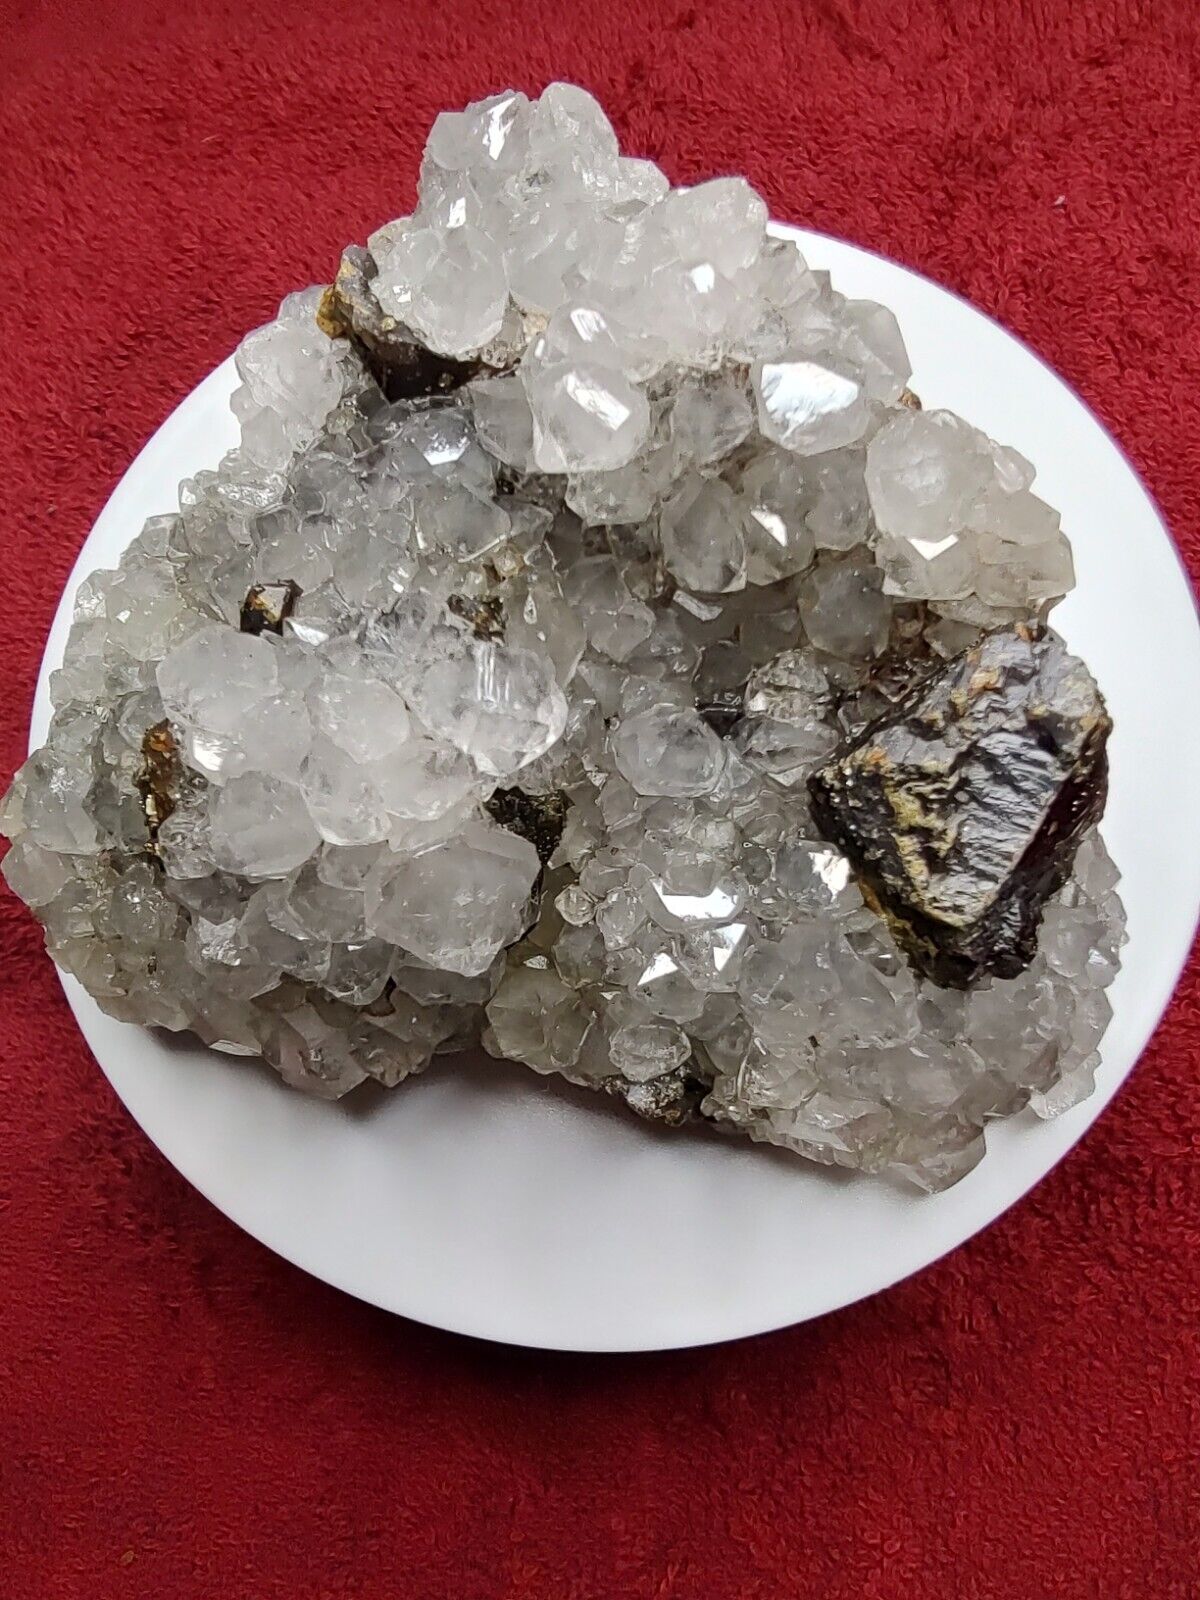 Quartz & Sphalerite Crystals On Matrix - Museum Quality From Private Collection